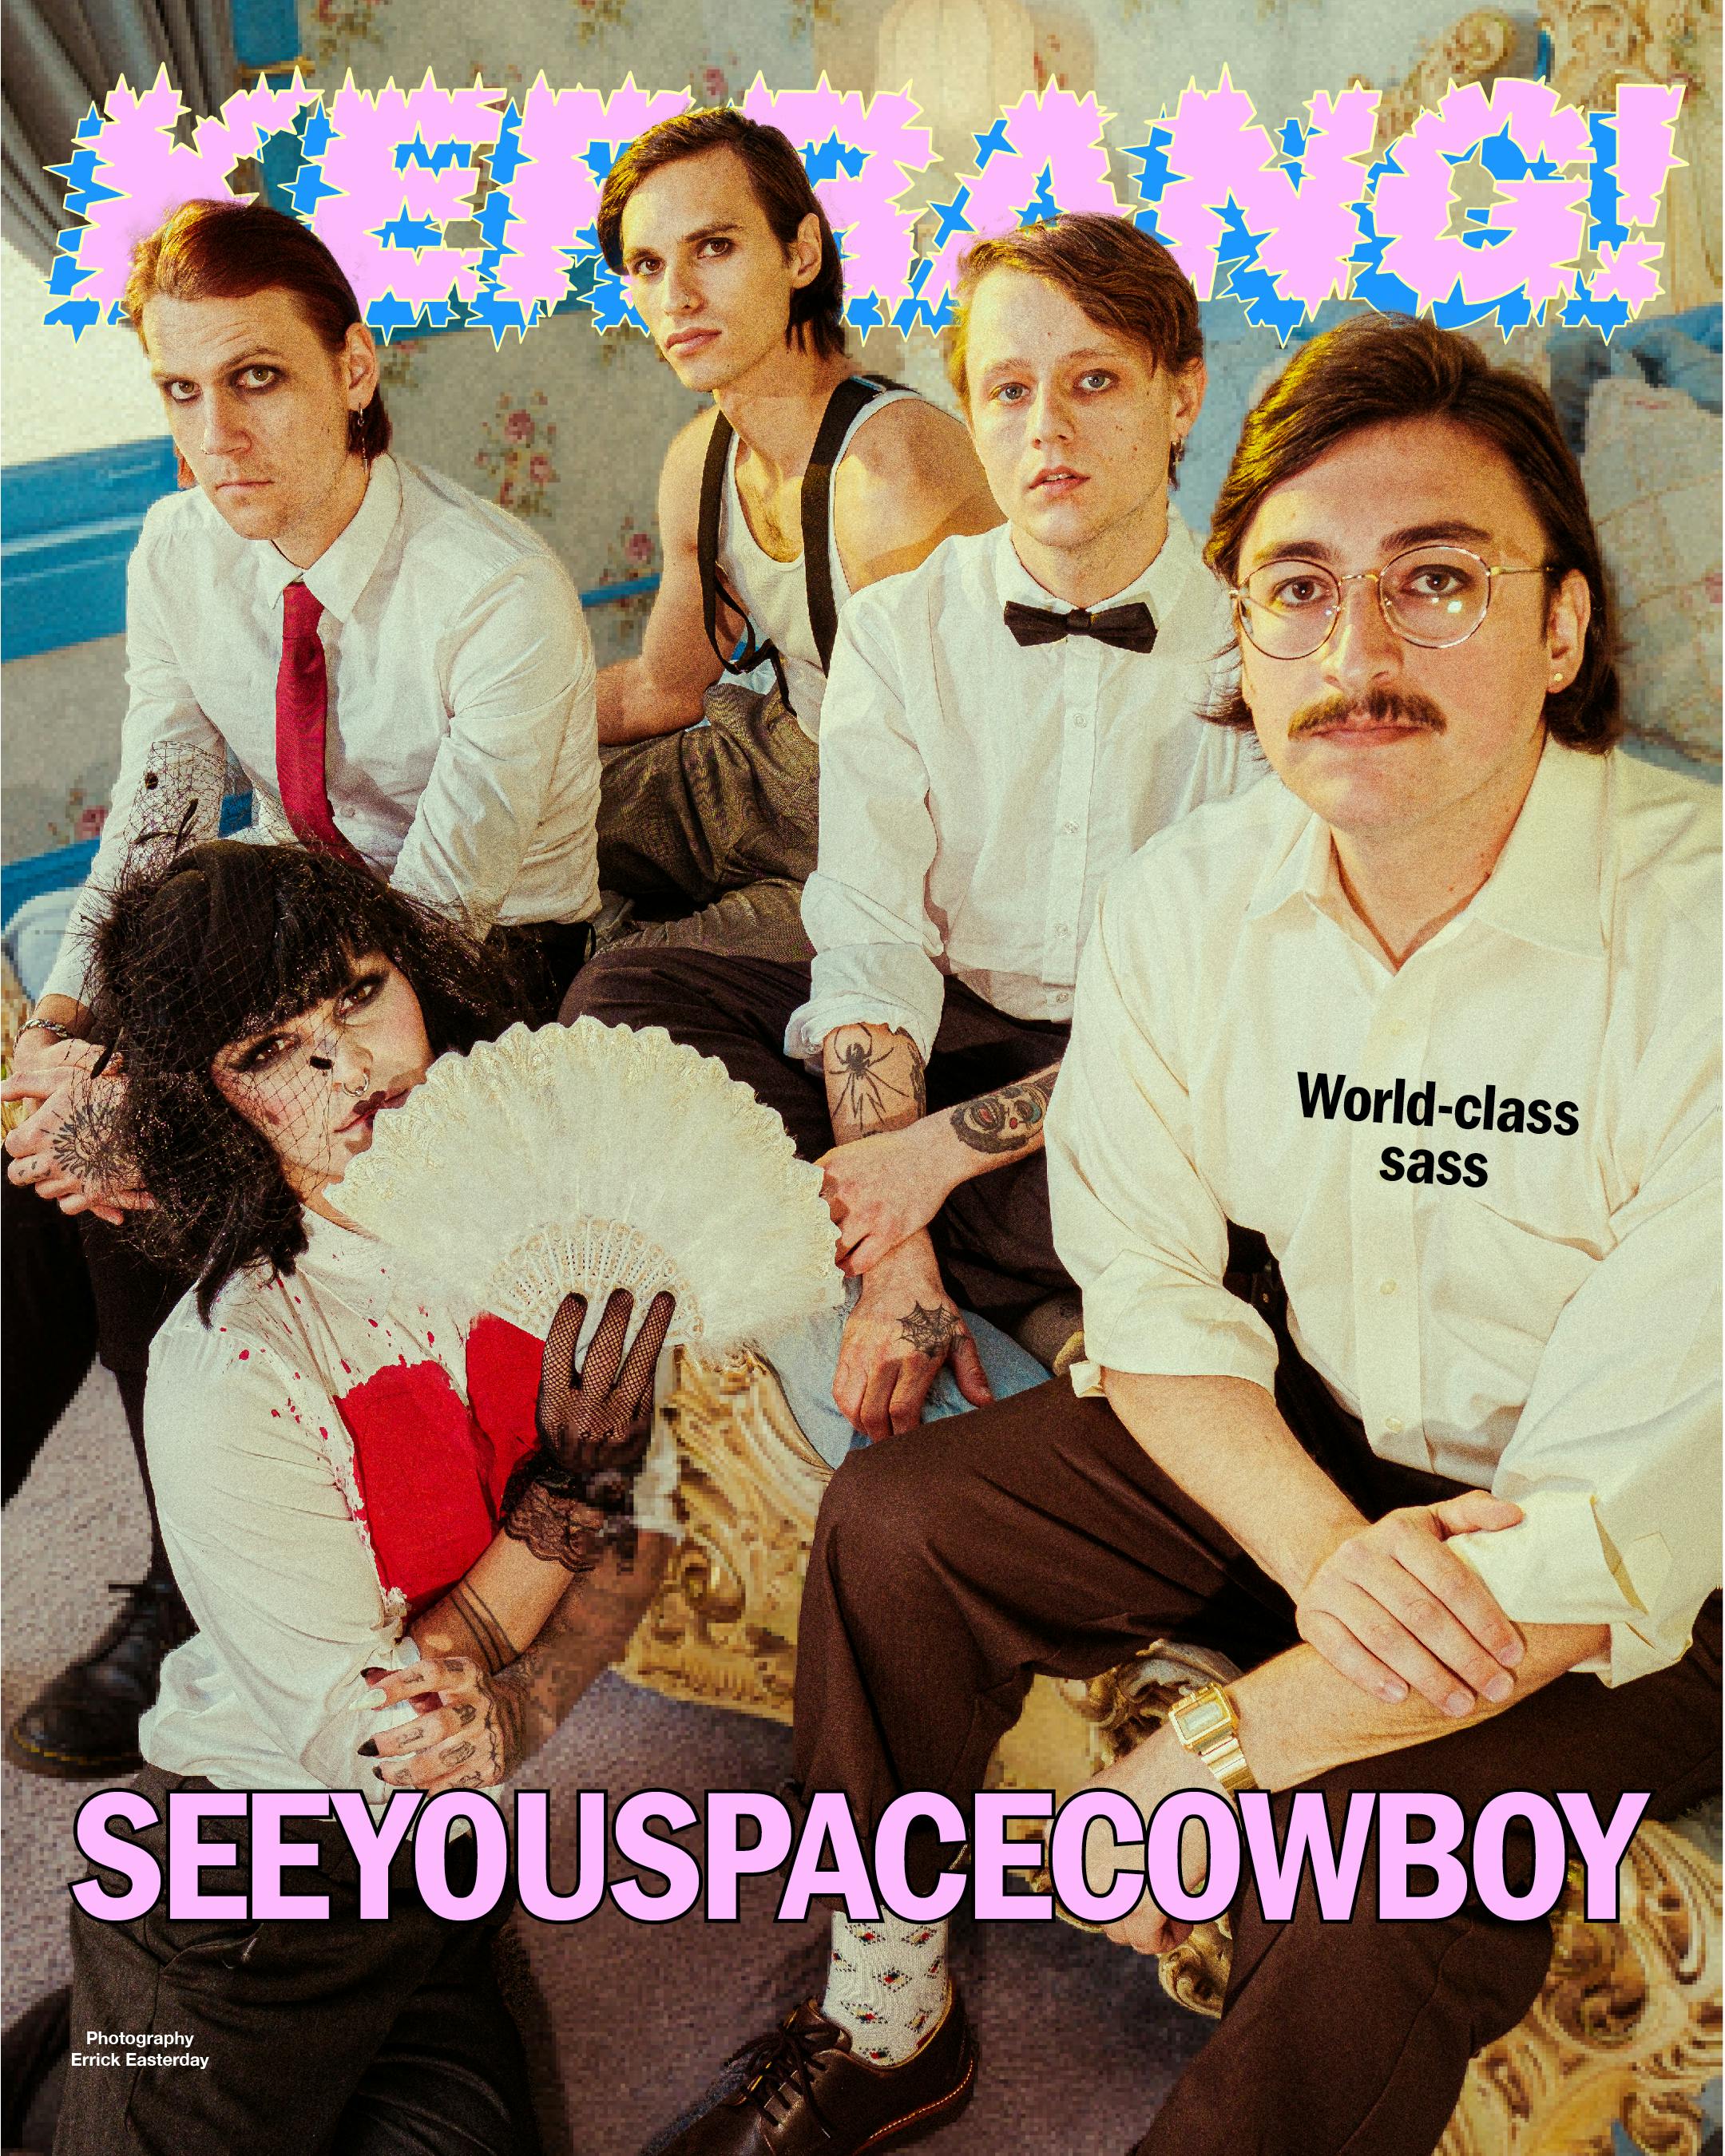 SeeYouSpaceCowboy: “This is the uncensored, no-holds-barred version of us”